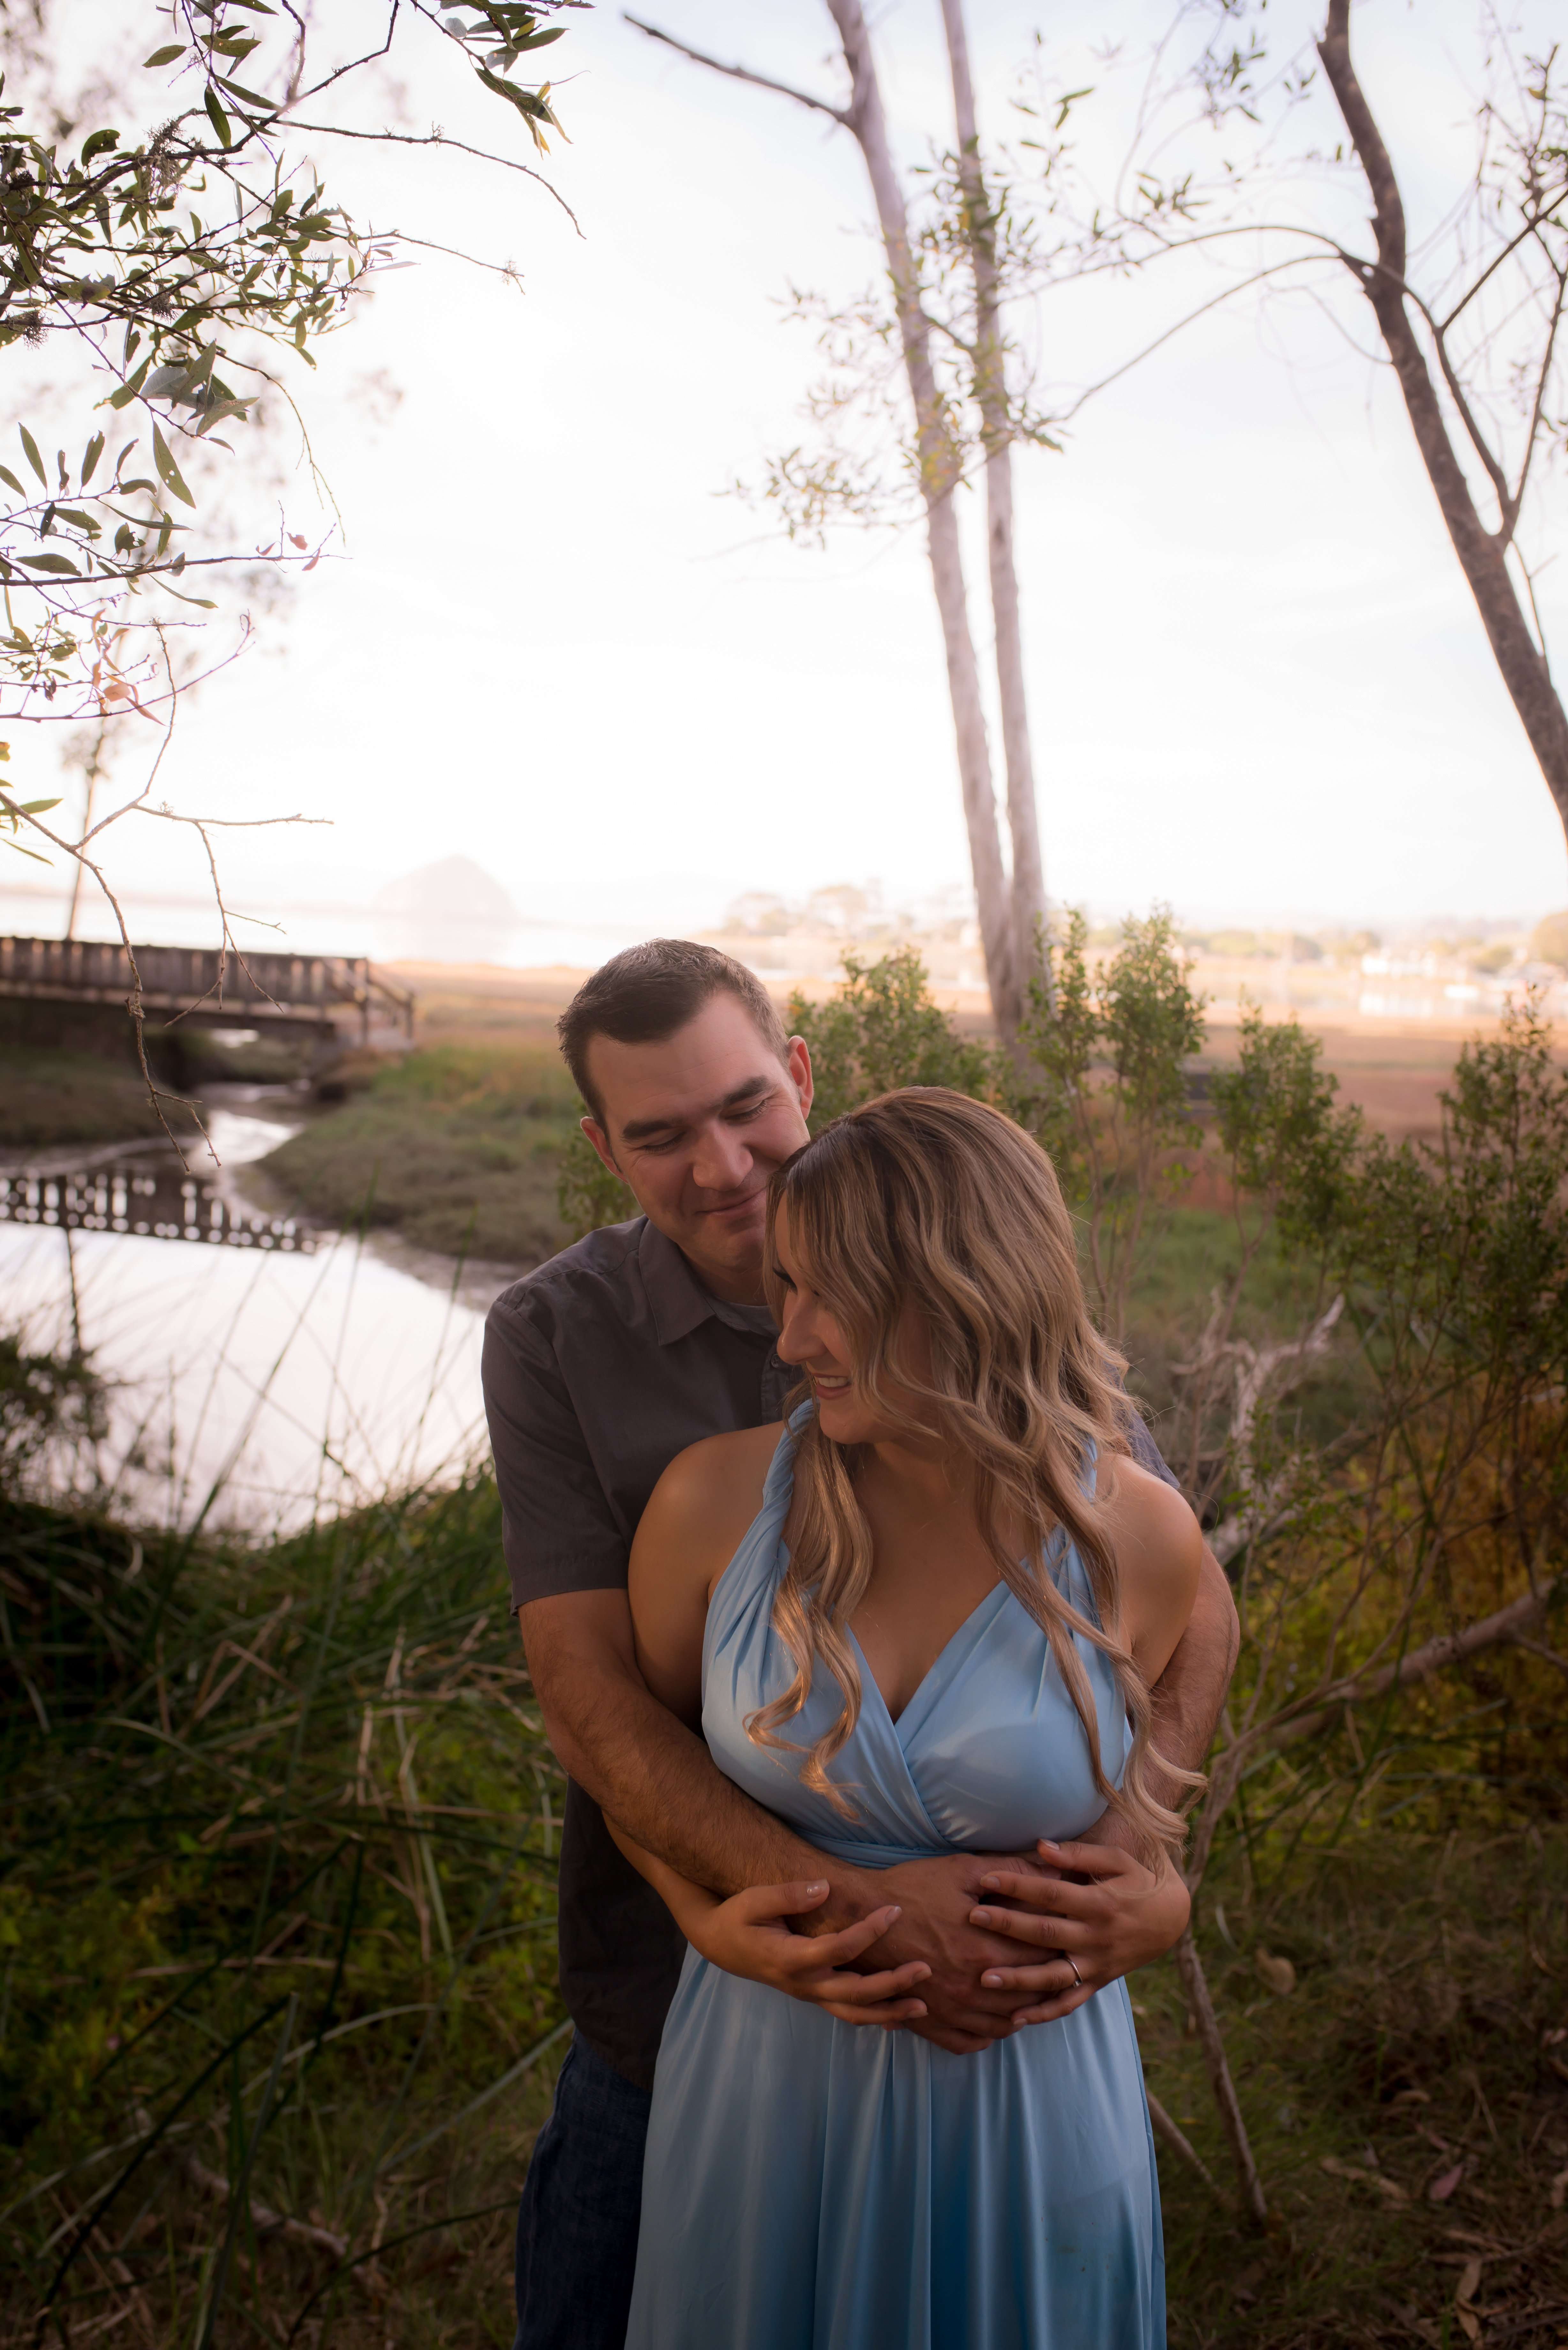 You are currently viewing Los Osos Sweet Springs Engagement Session